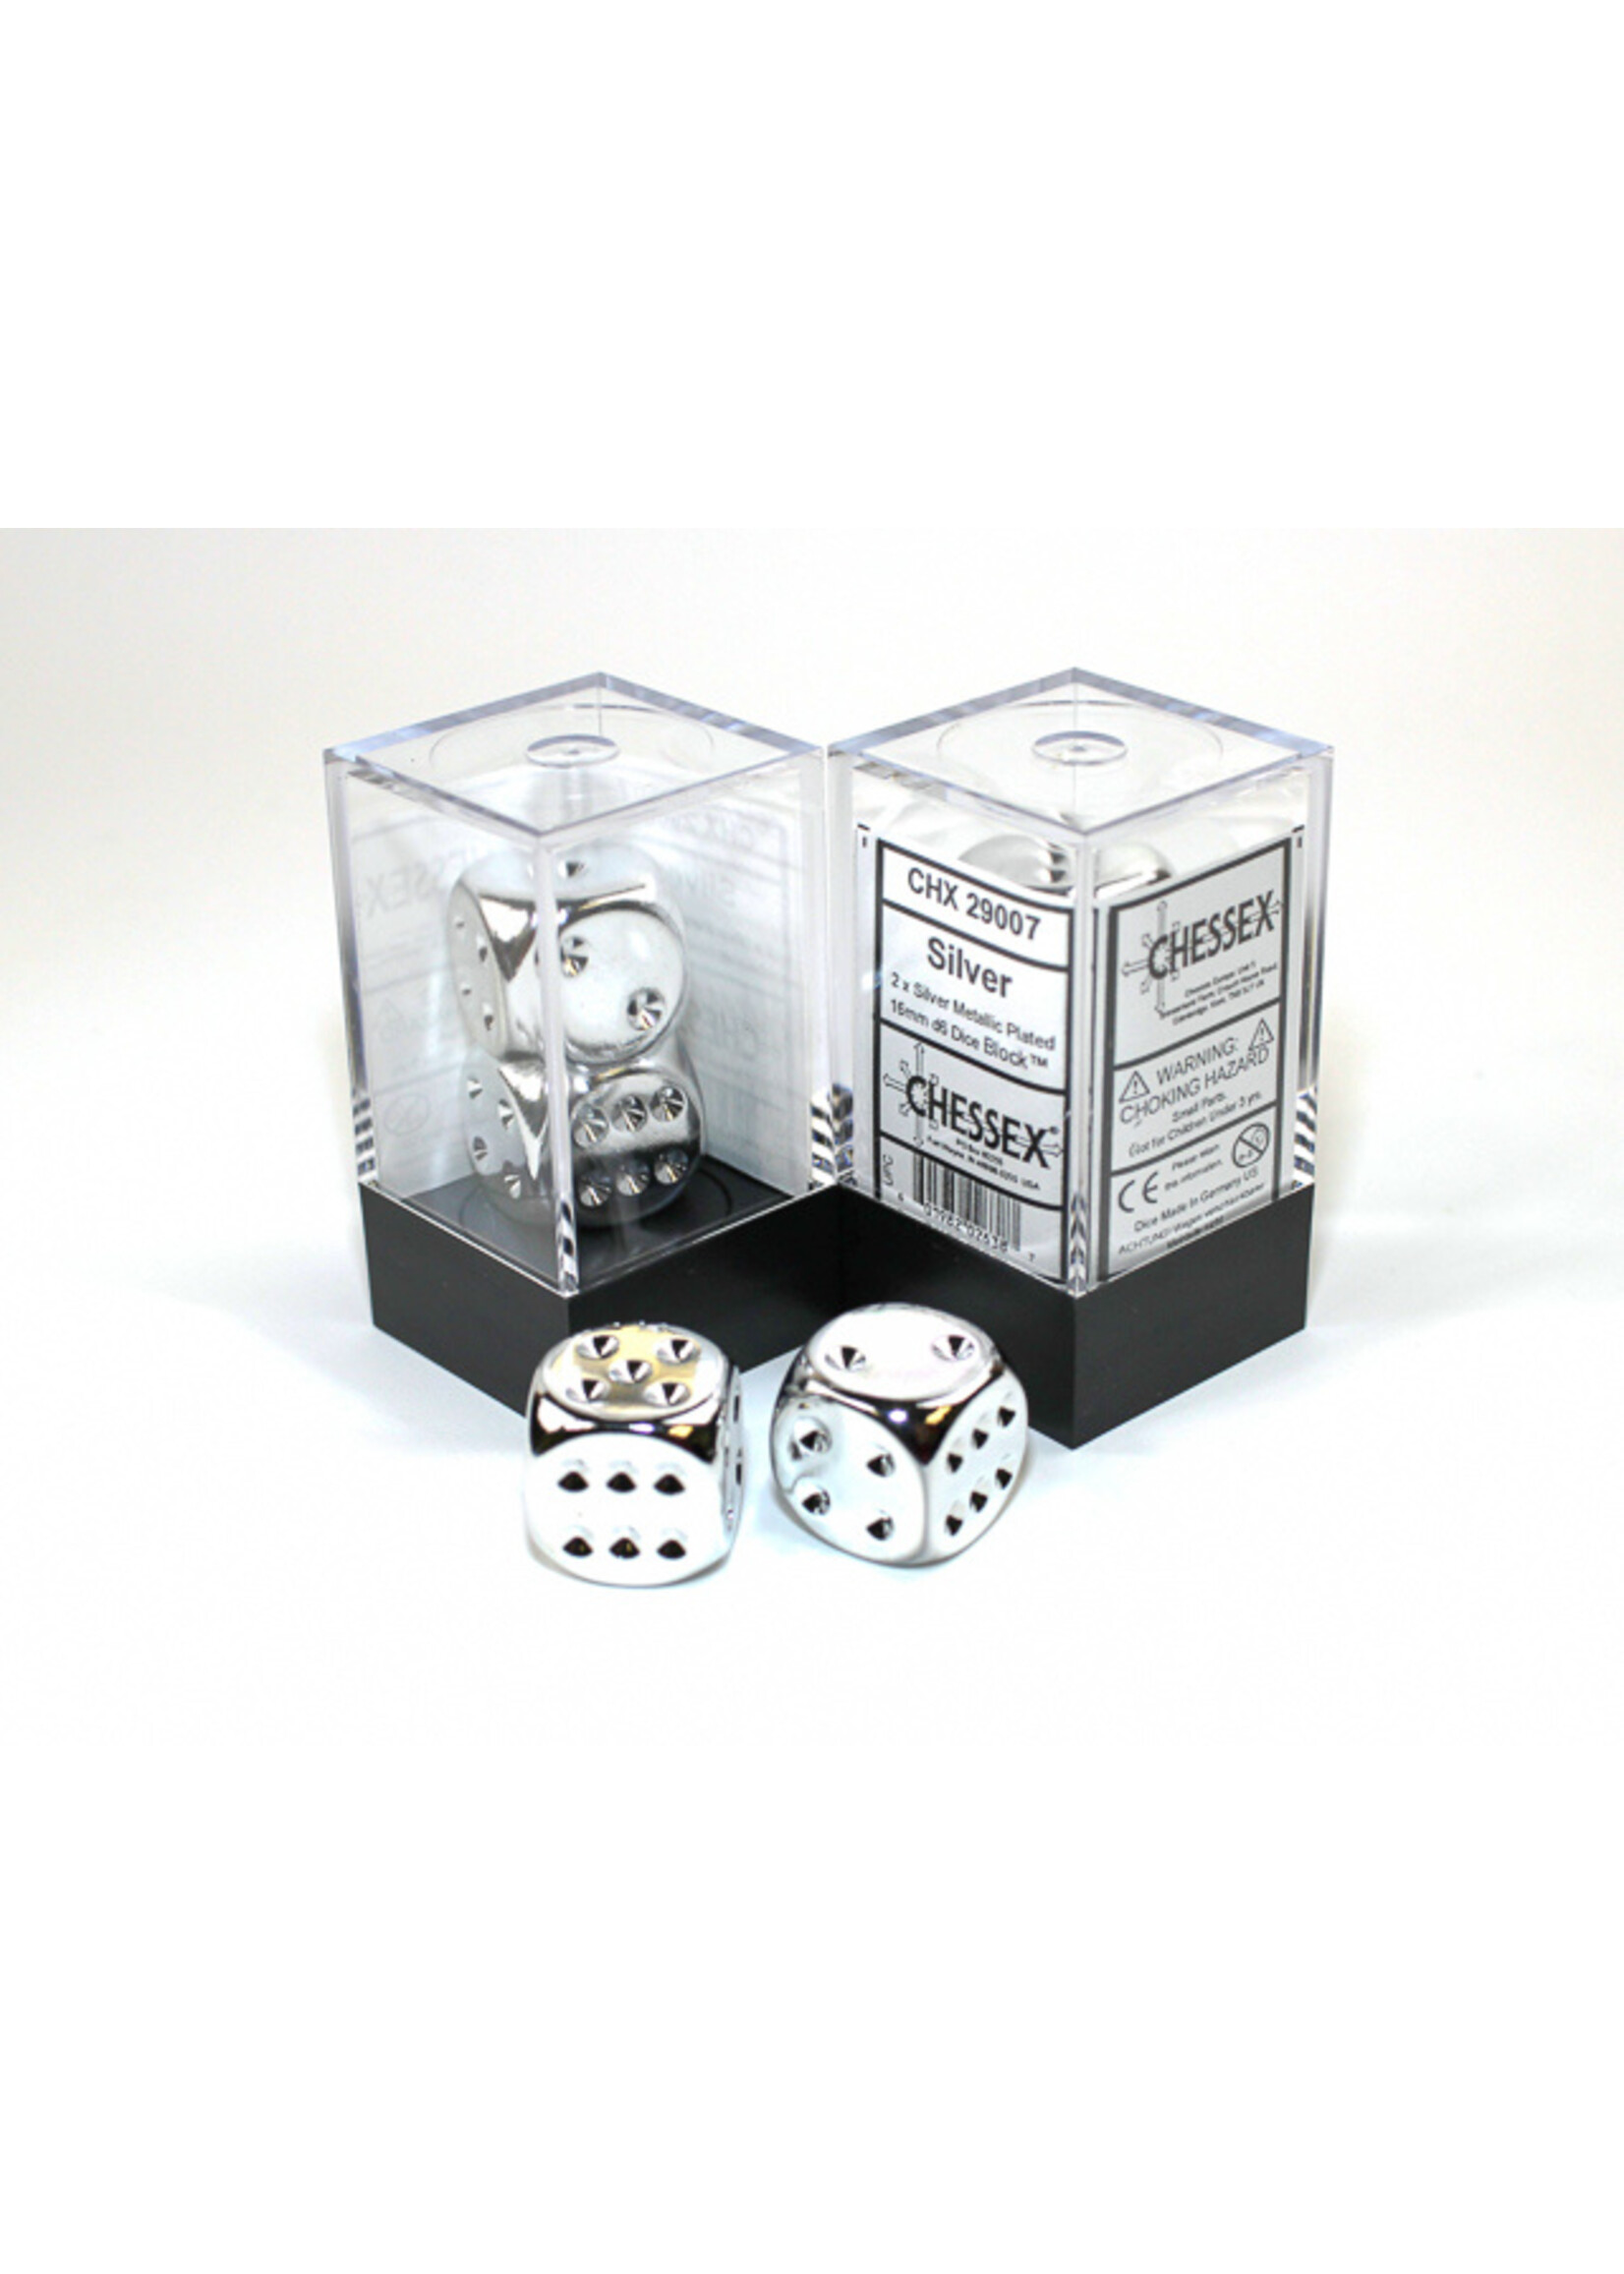 Chessex MTL 2d6 silver plated